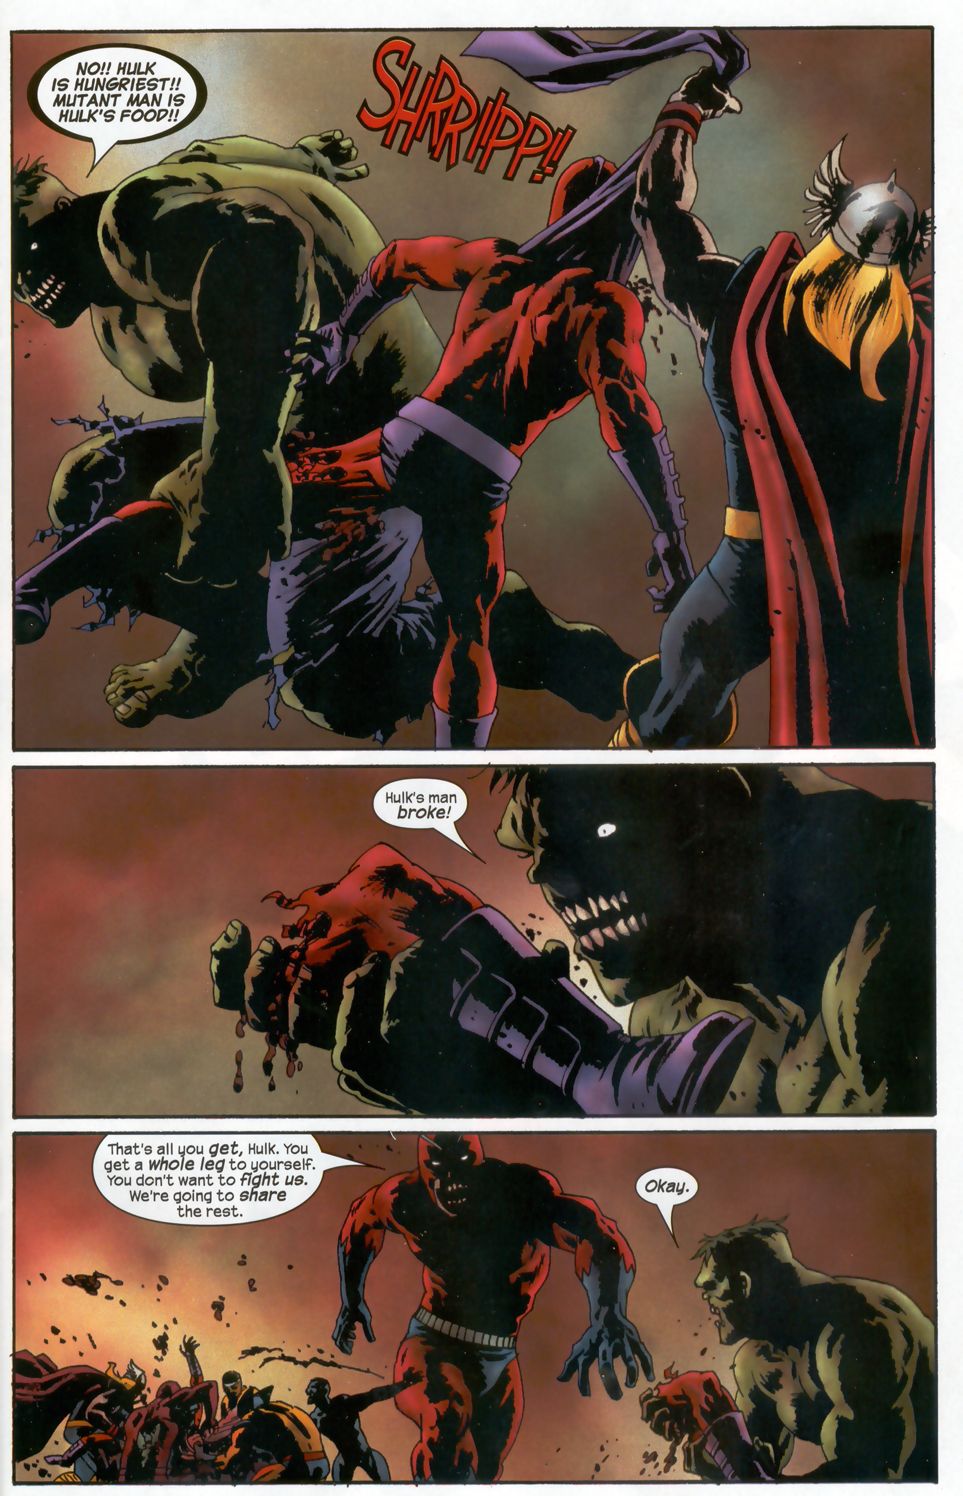 Marvel Zombies 1, Part 1 of 5